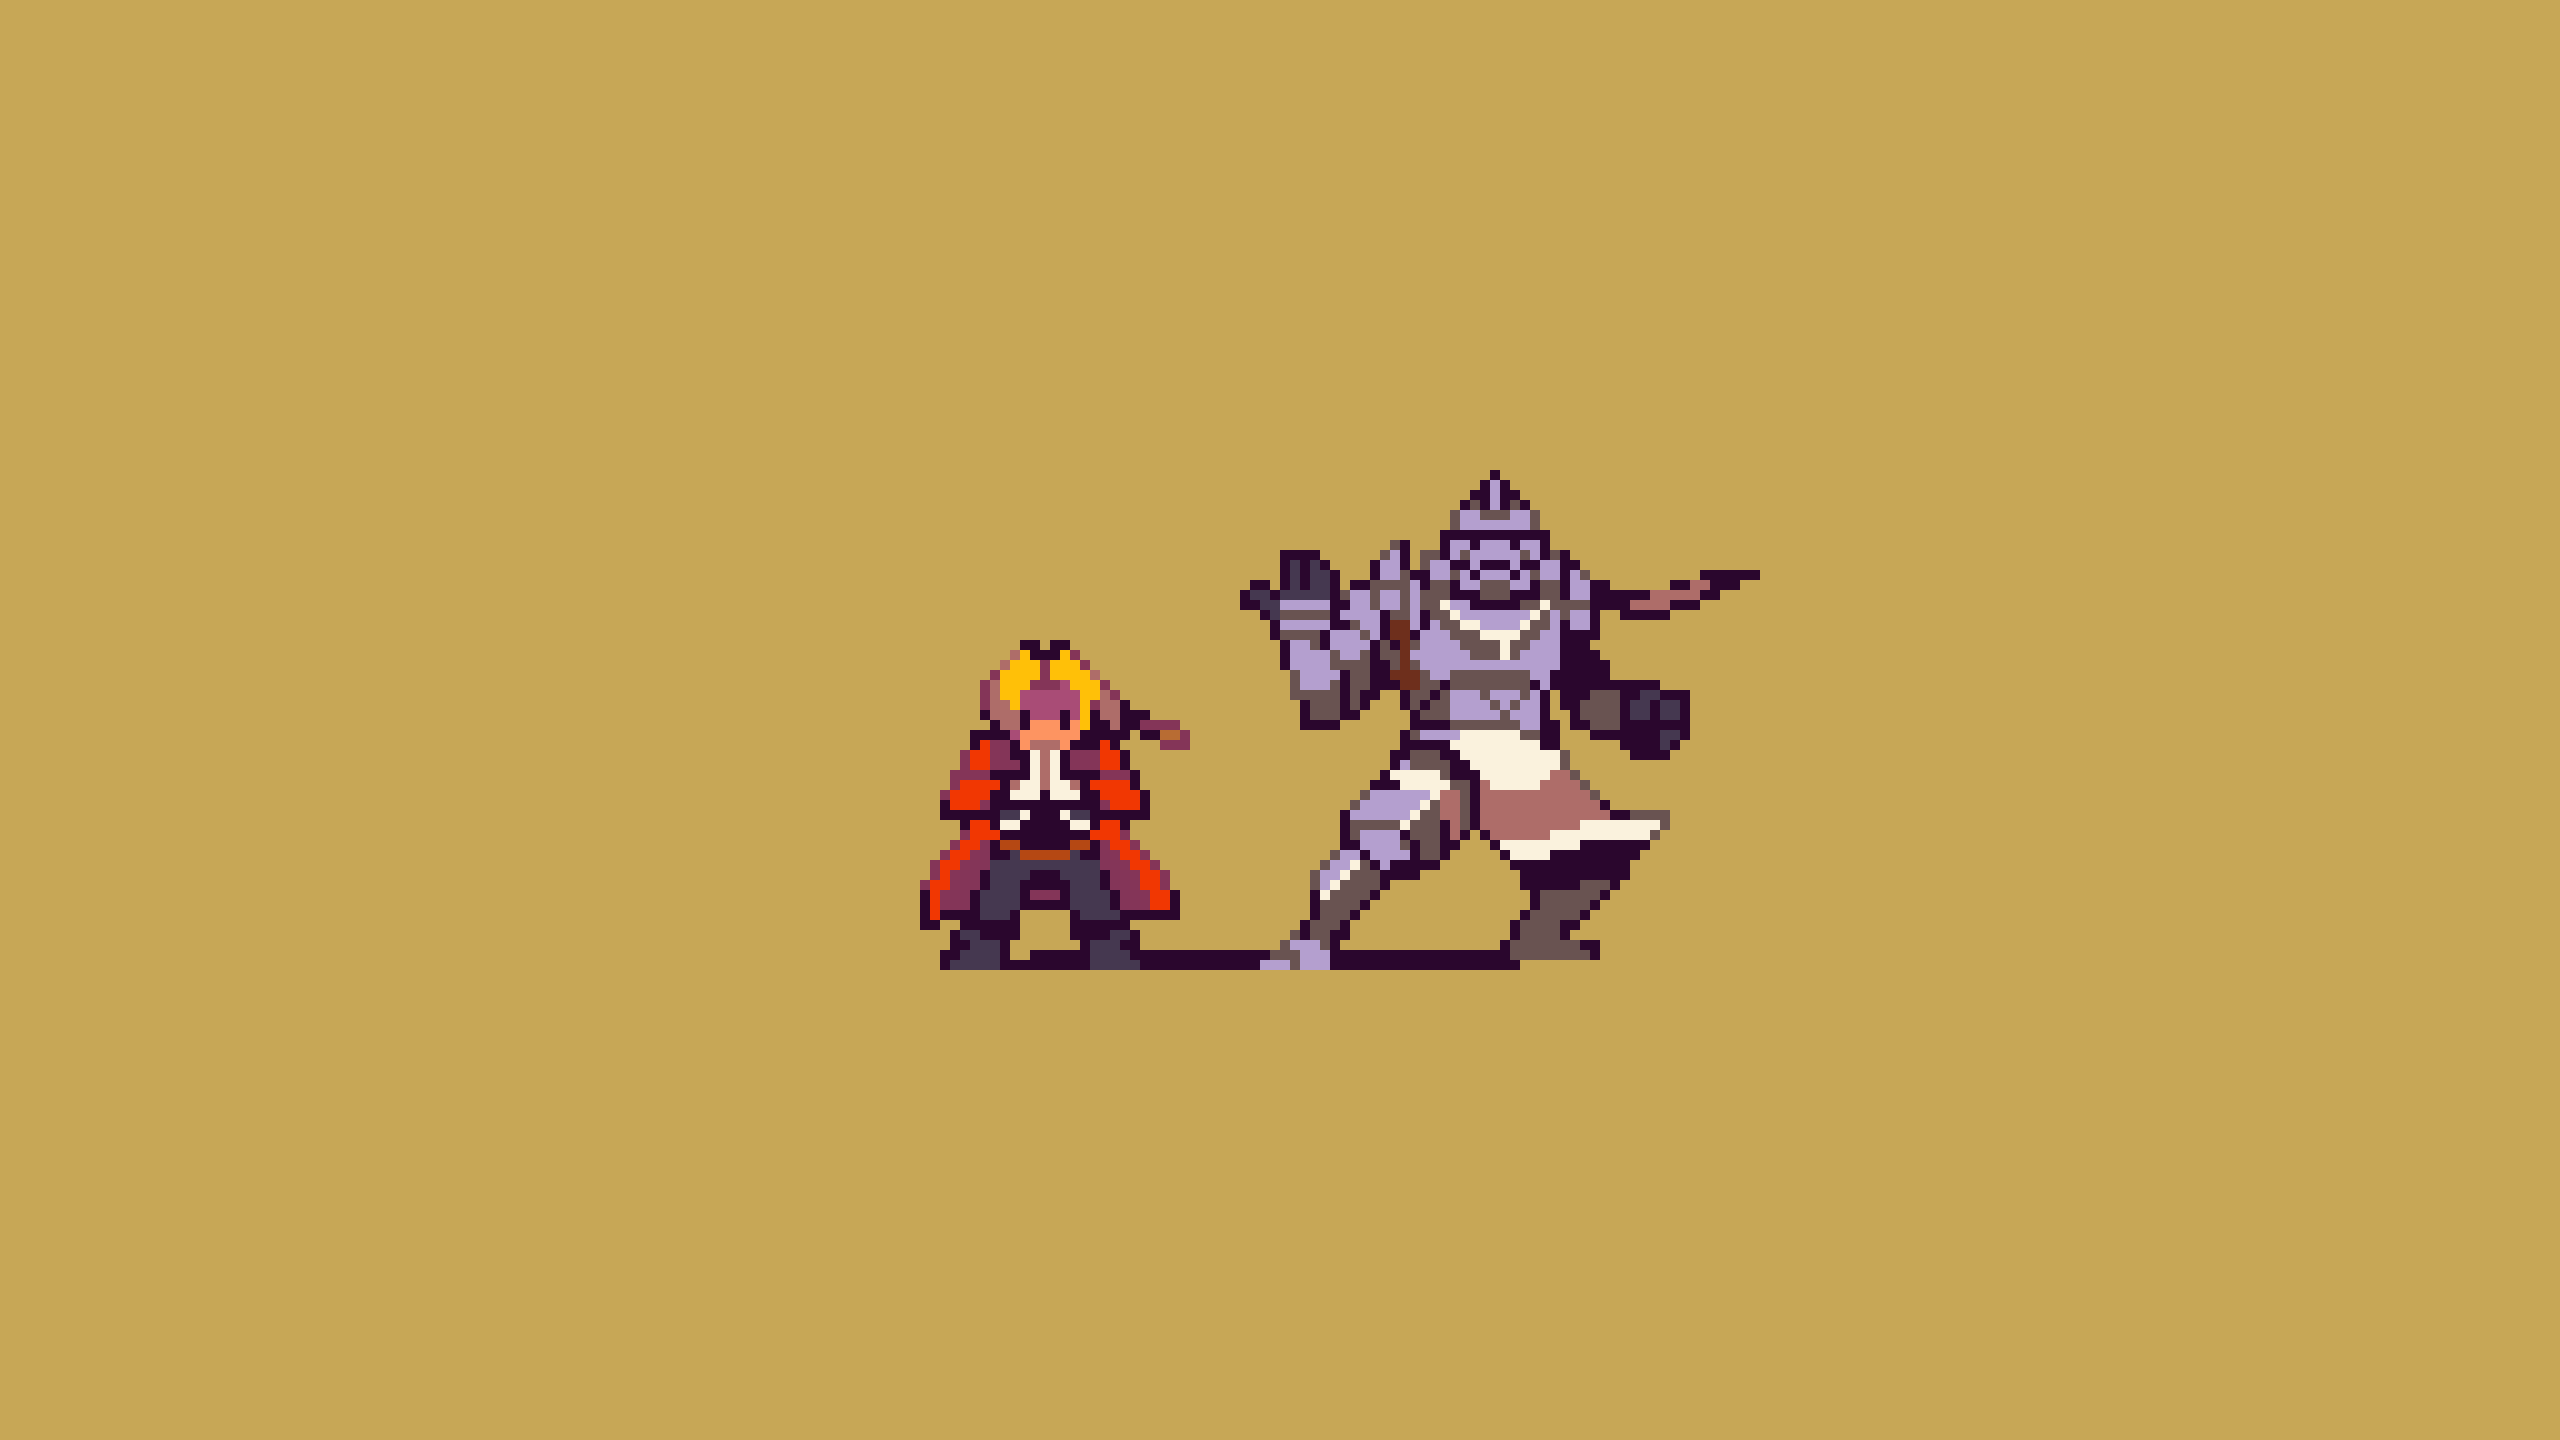 Anime 2560x1440 pixelated pixel art Full Metal Alchemist Full Metal Alchemist Brotherhood Elric Edward Elric Alphonse simple background minimalism armor cape braids loincloth loin cloth gloves white gloves red cape bangs fighting stance clapping